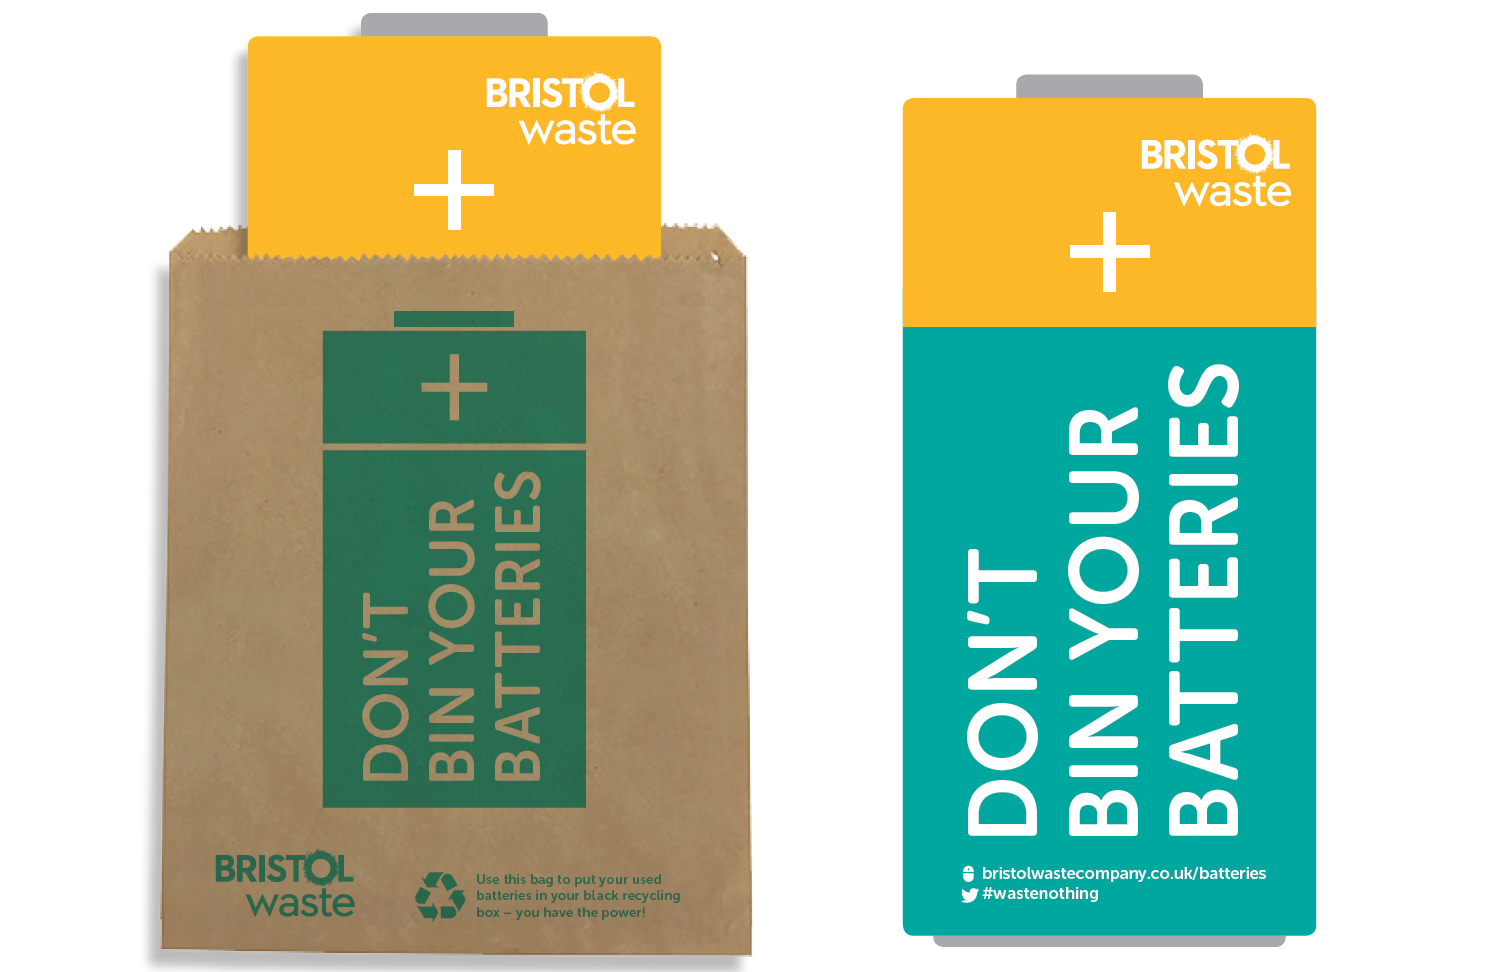 A Bristol Waste don't bring your batteries campaign kit